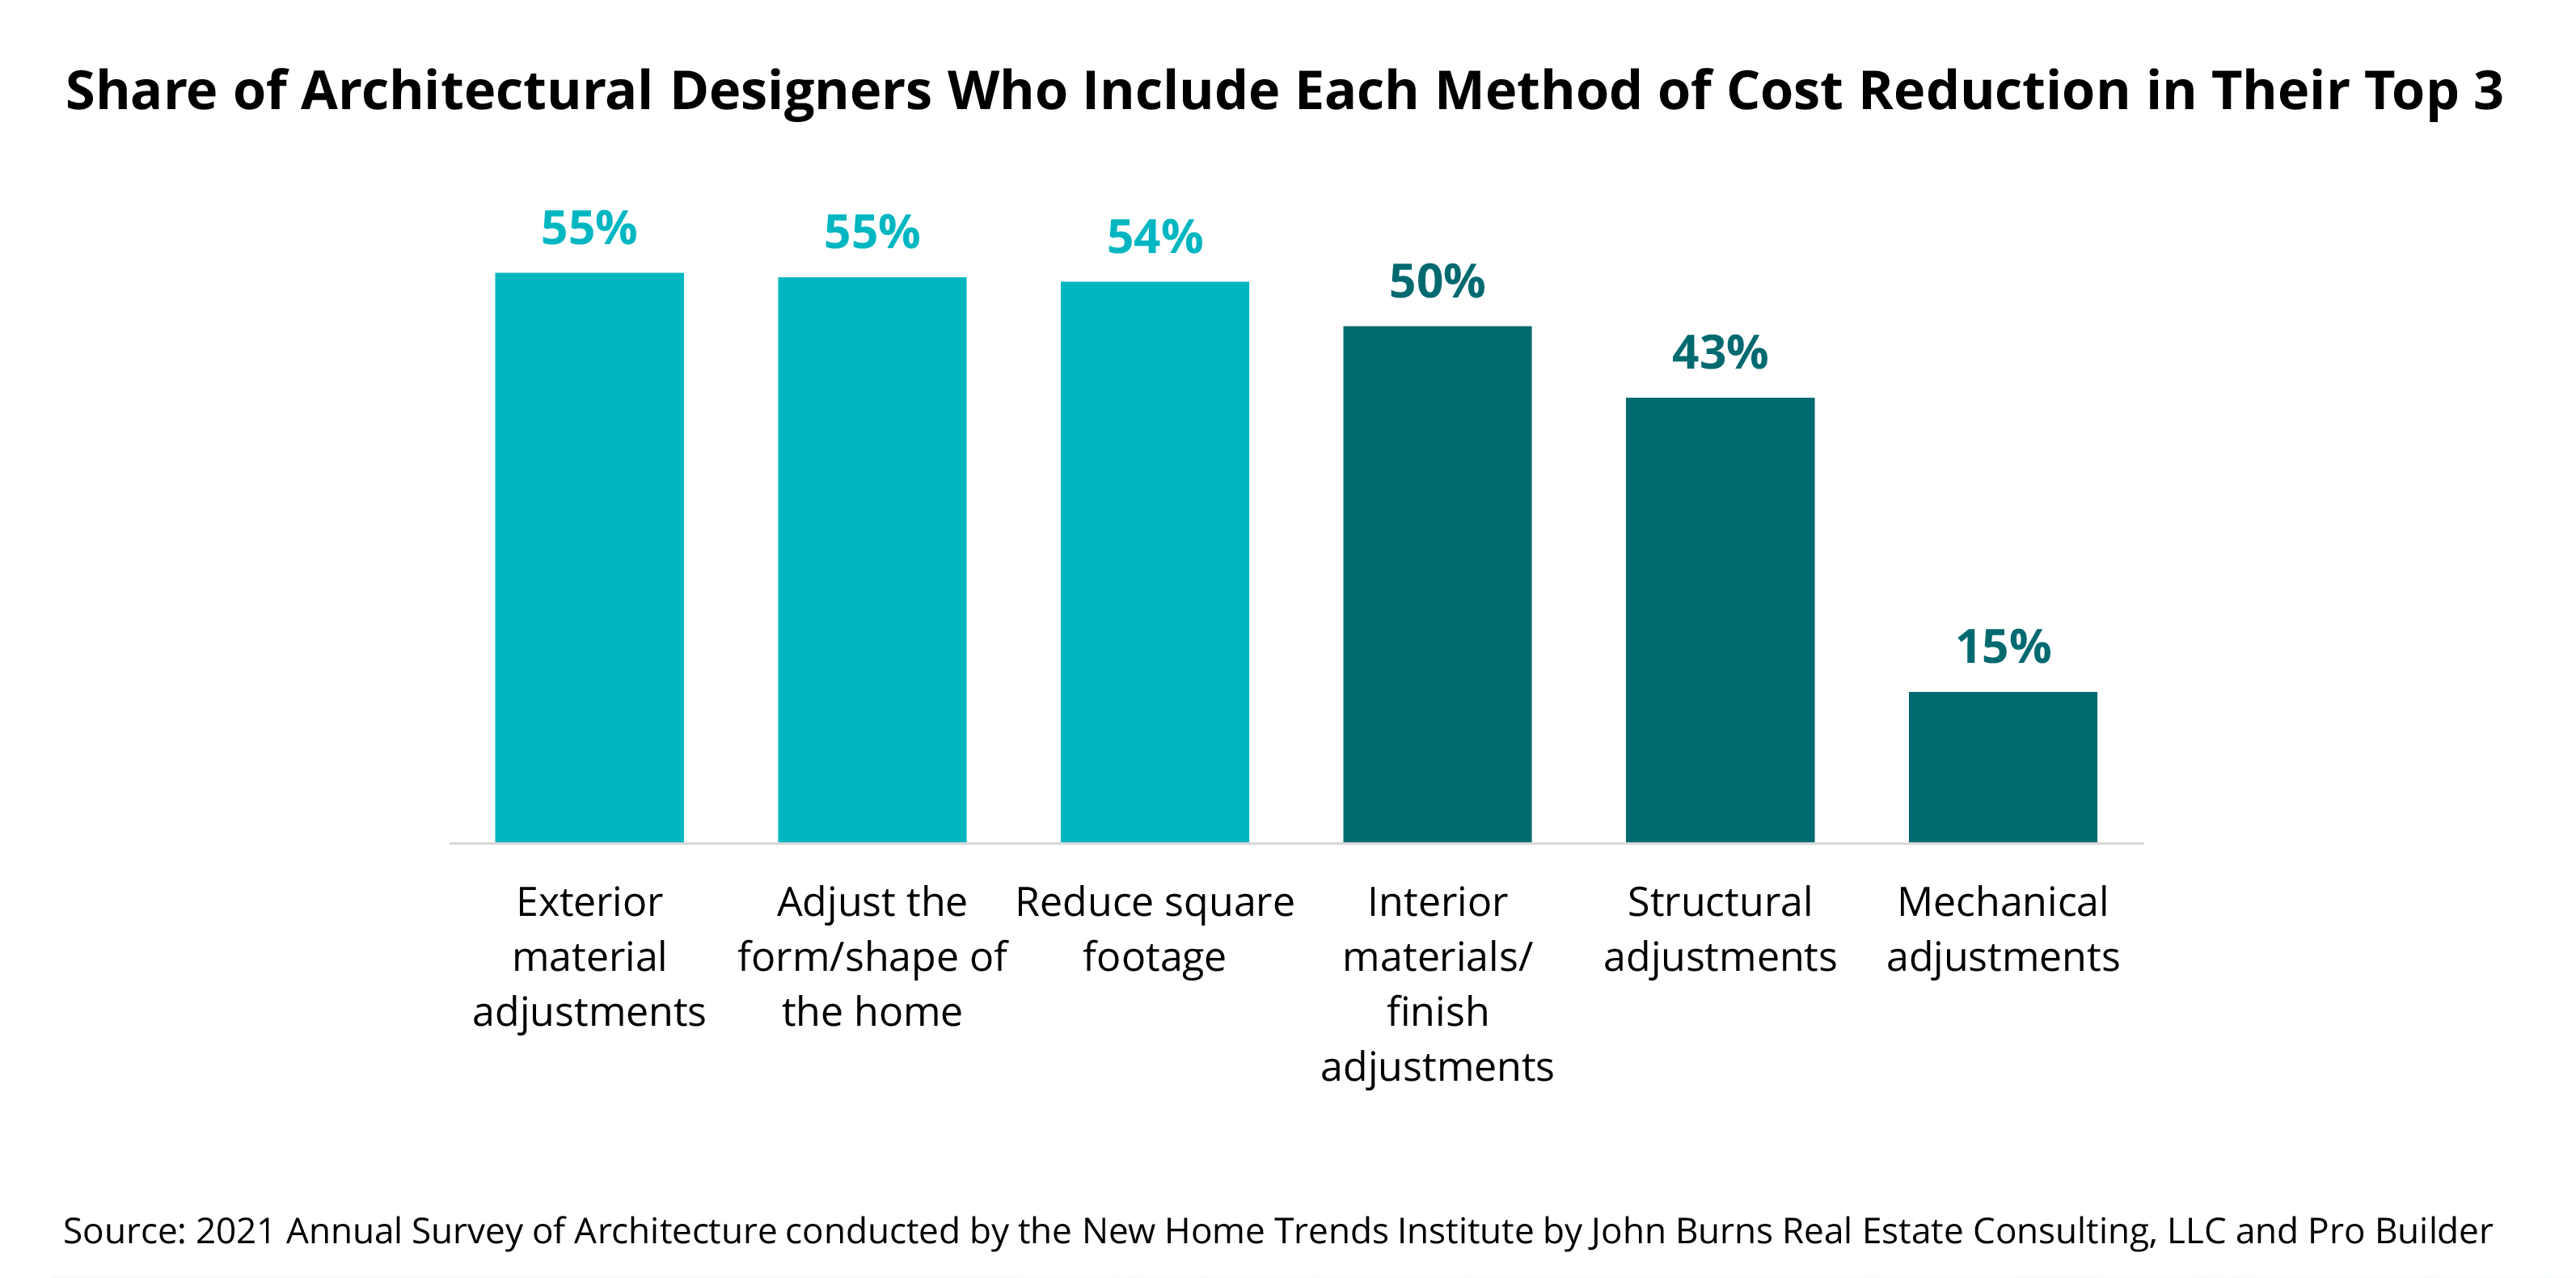 Share of architectural designers who include each method of cost reduction in their top 3